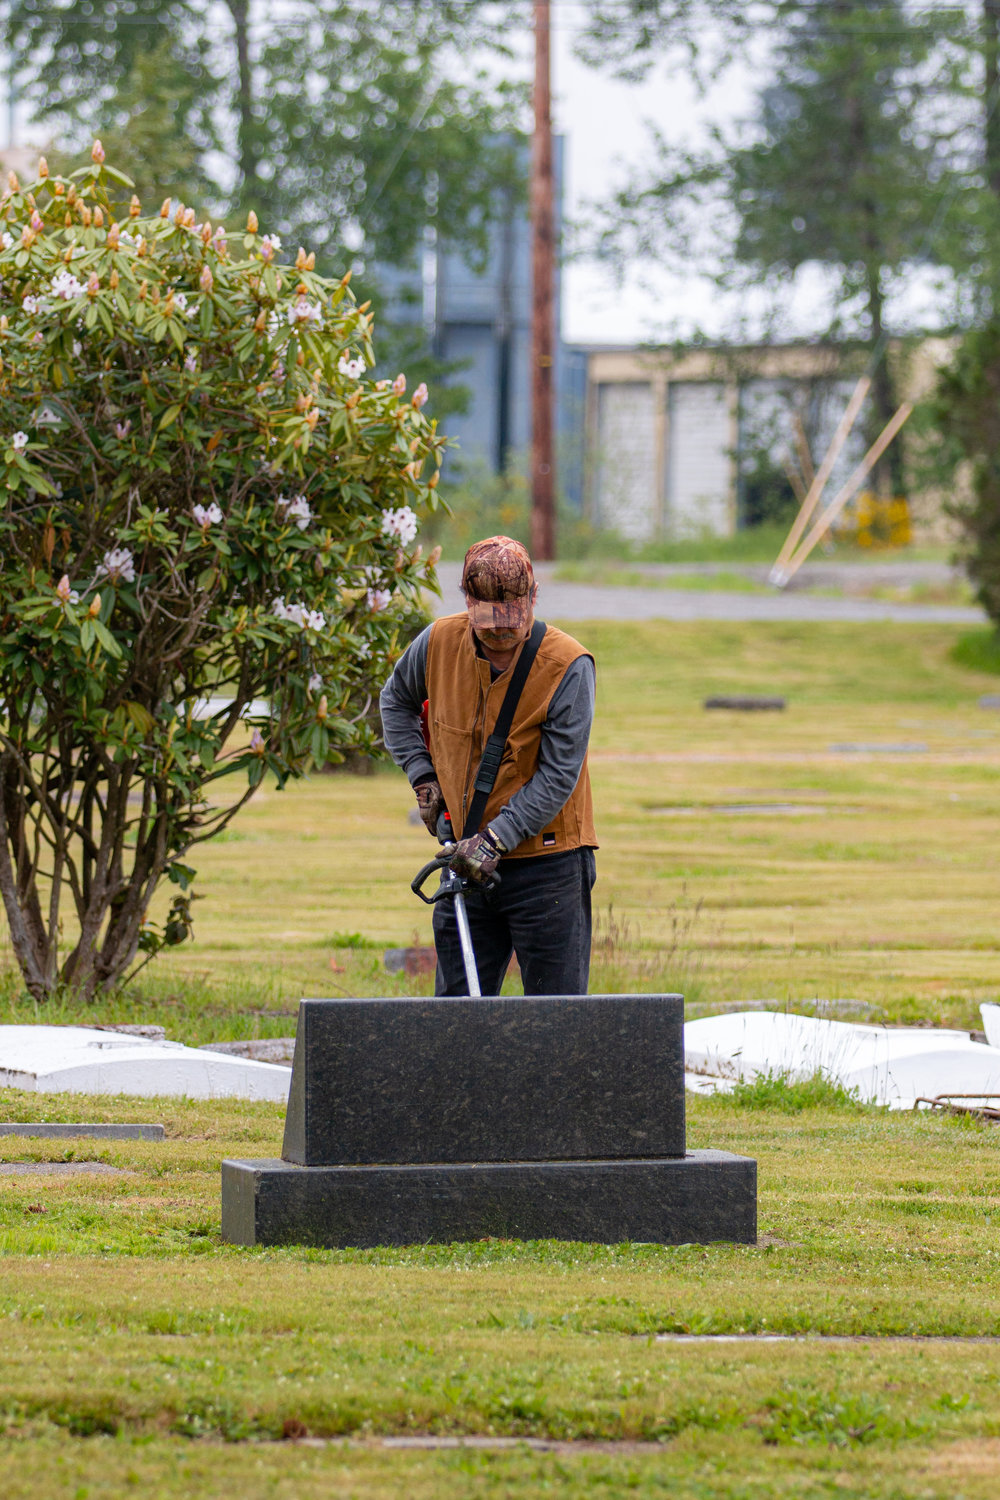 Roy Triana, whose family rests at the Greenwood Memorial Park, trims grass along a headstone. His wife Marie was also part of the work party.